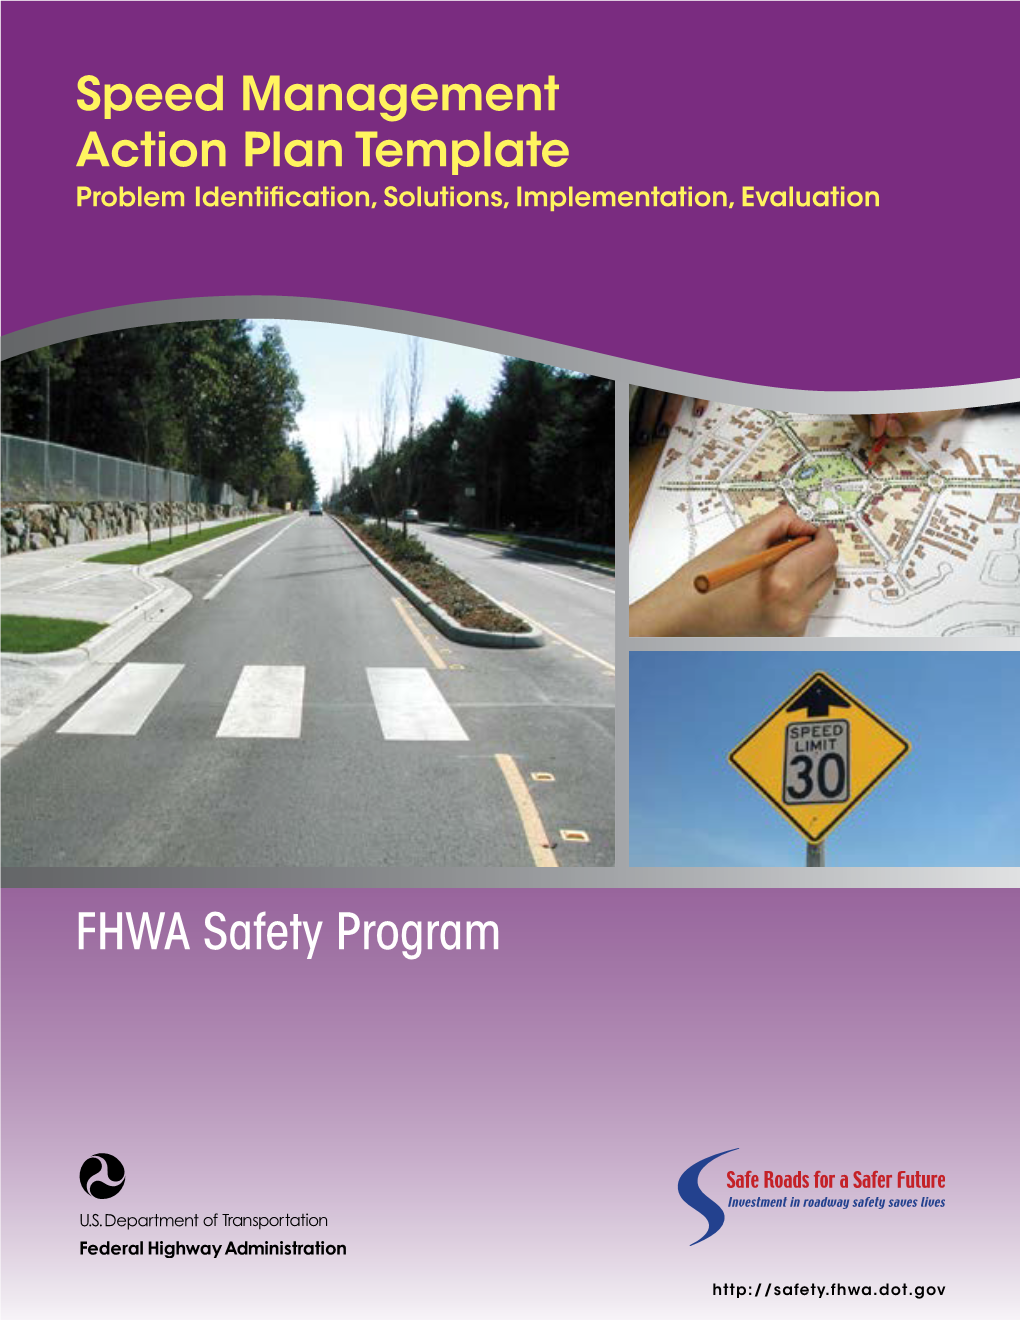 Speed Management Action Plan Template Problem Identiﬁcation, Solutions, Implementation, Evaluation